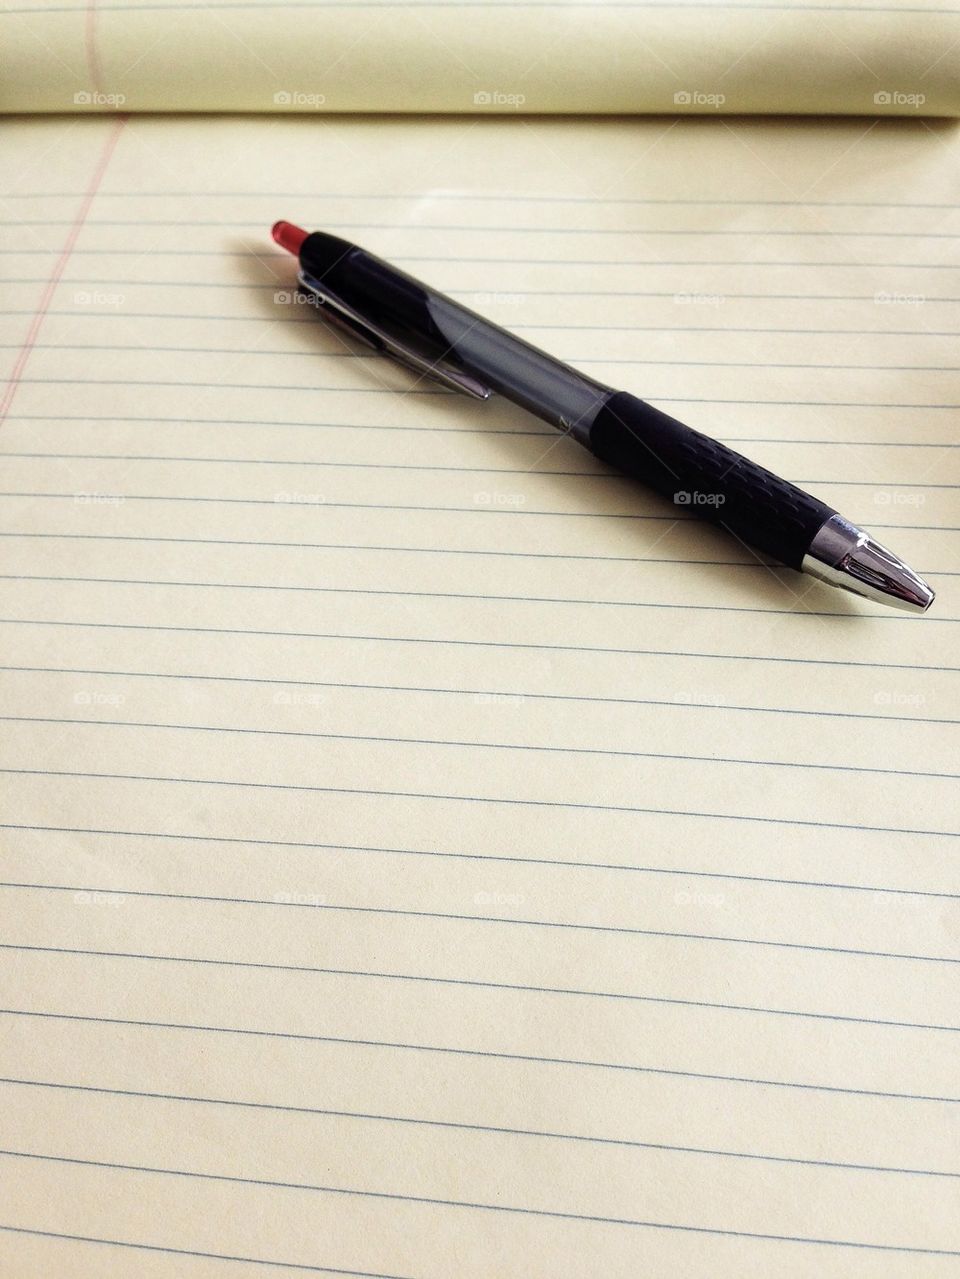 Red pen on a pad